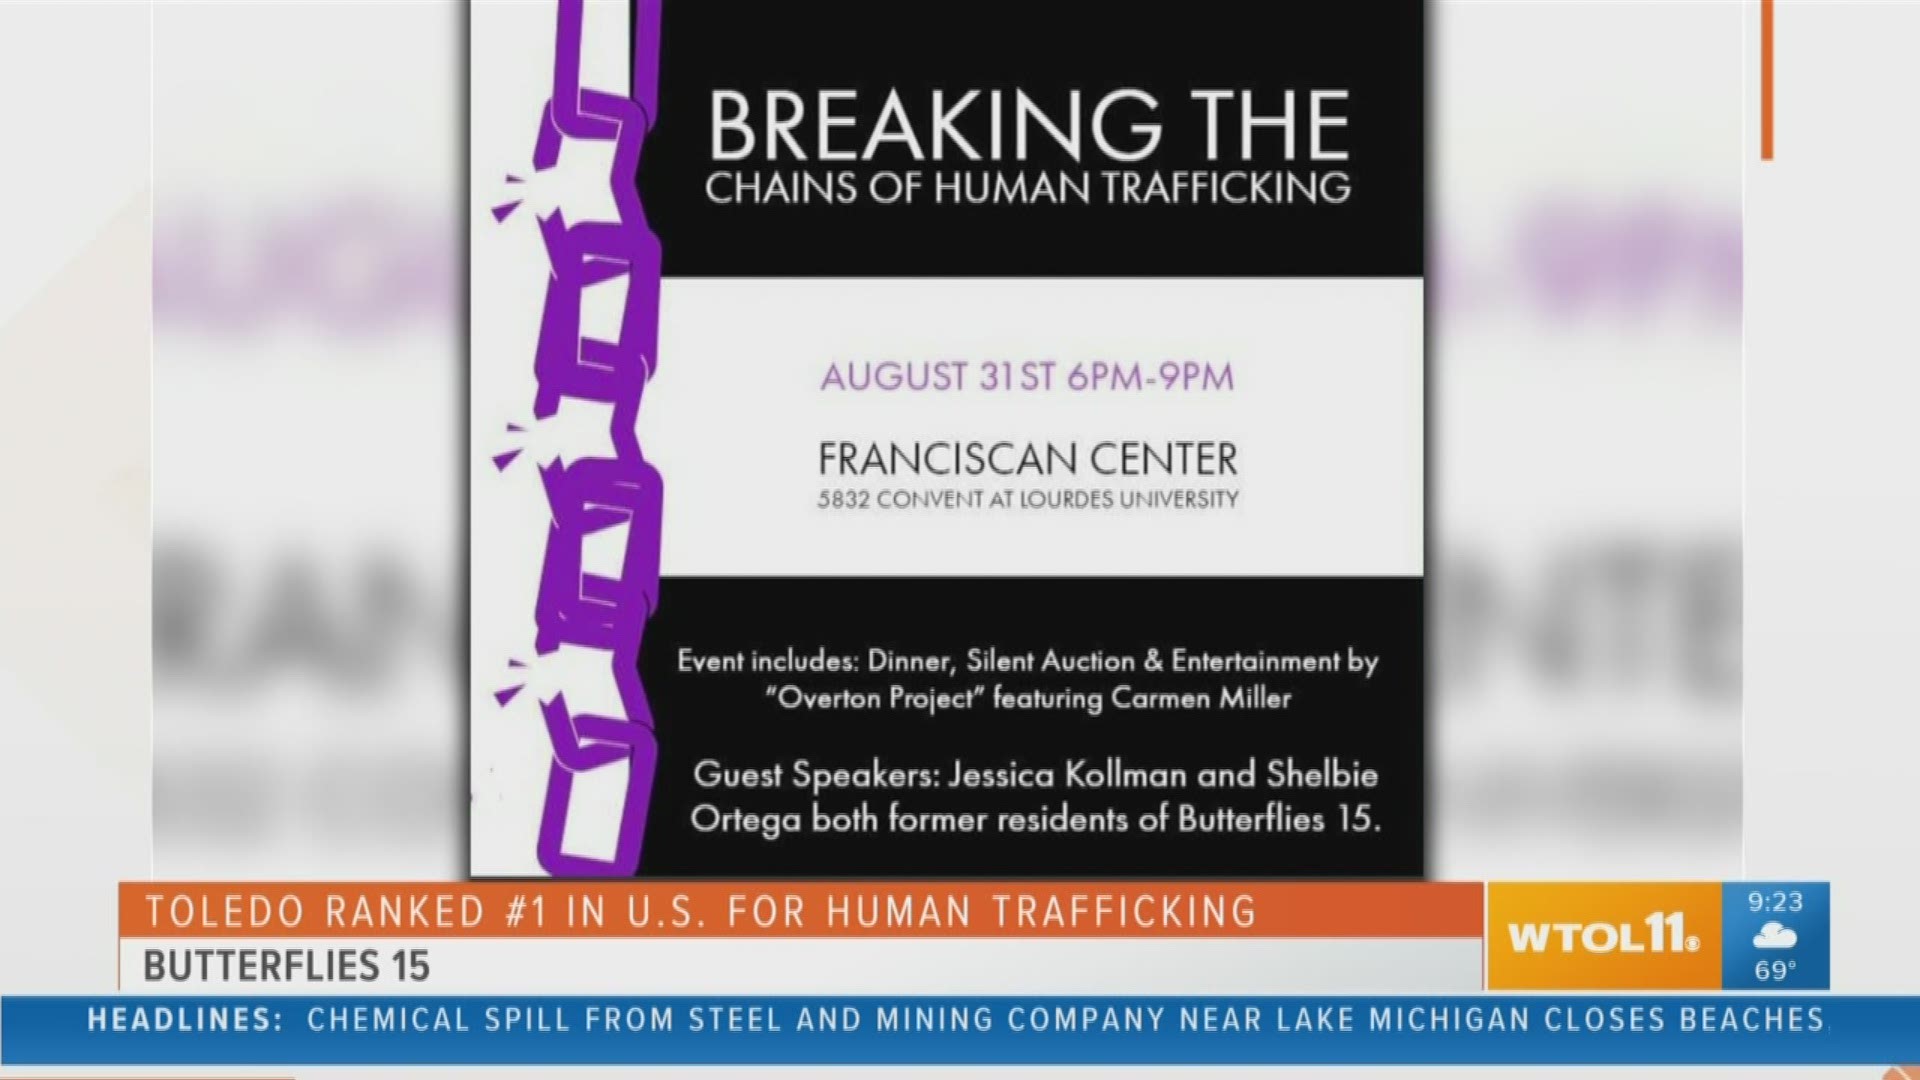 Get tickets for "The Ball" put on by Butterflies 15 to "Break the Chain" of human trafficking!